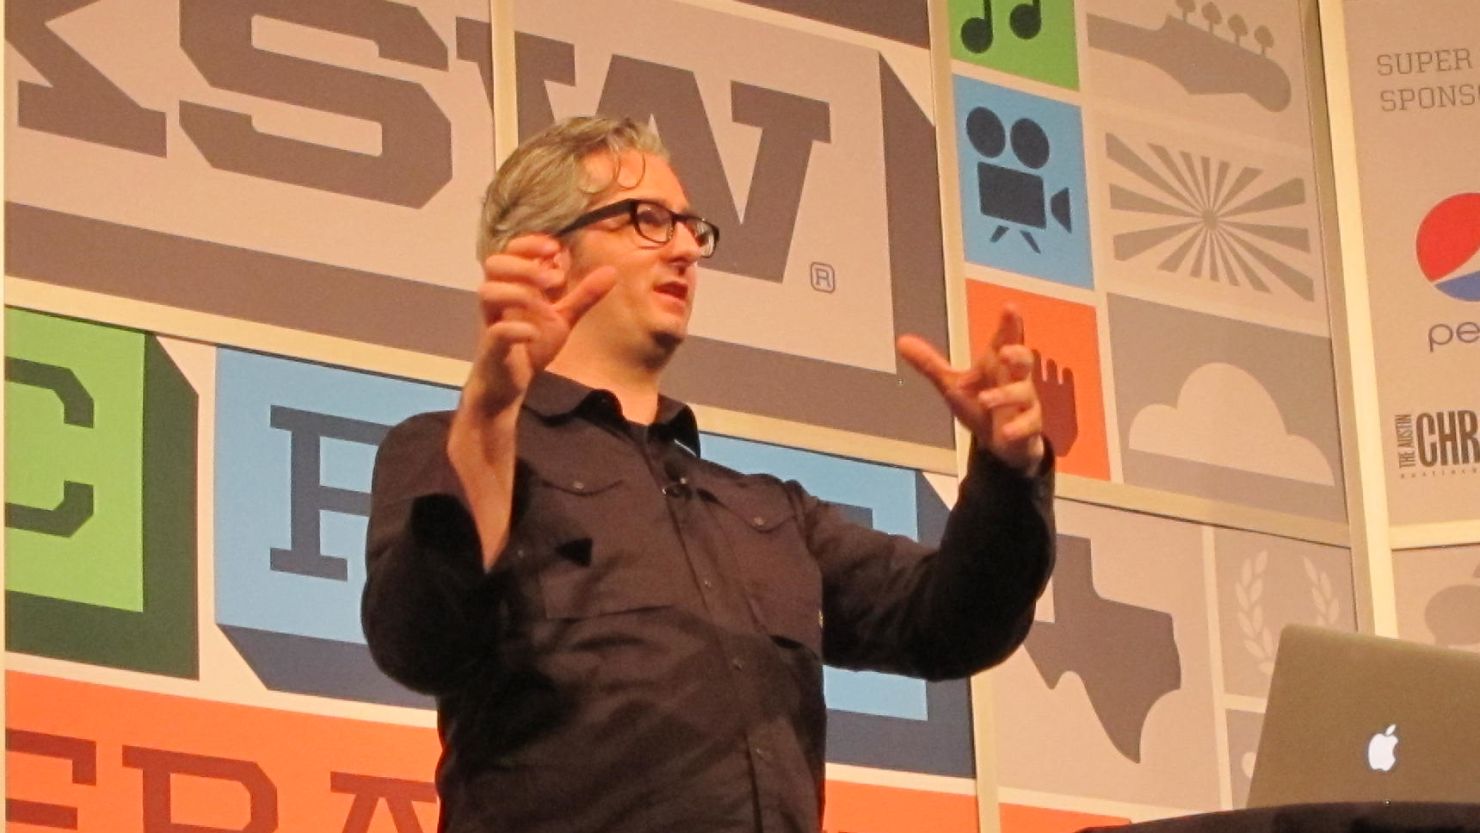 MakerBot CEO Bre Pettis speaks Friday at the South by Southwest Interactive festival in Austin, Texas.